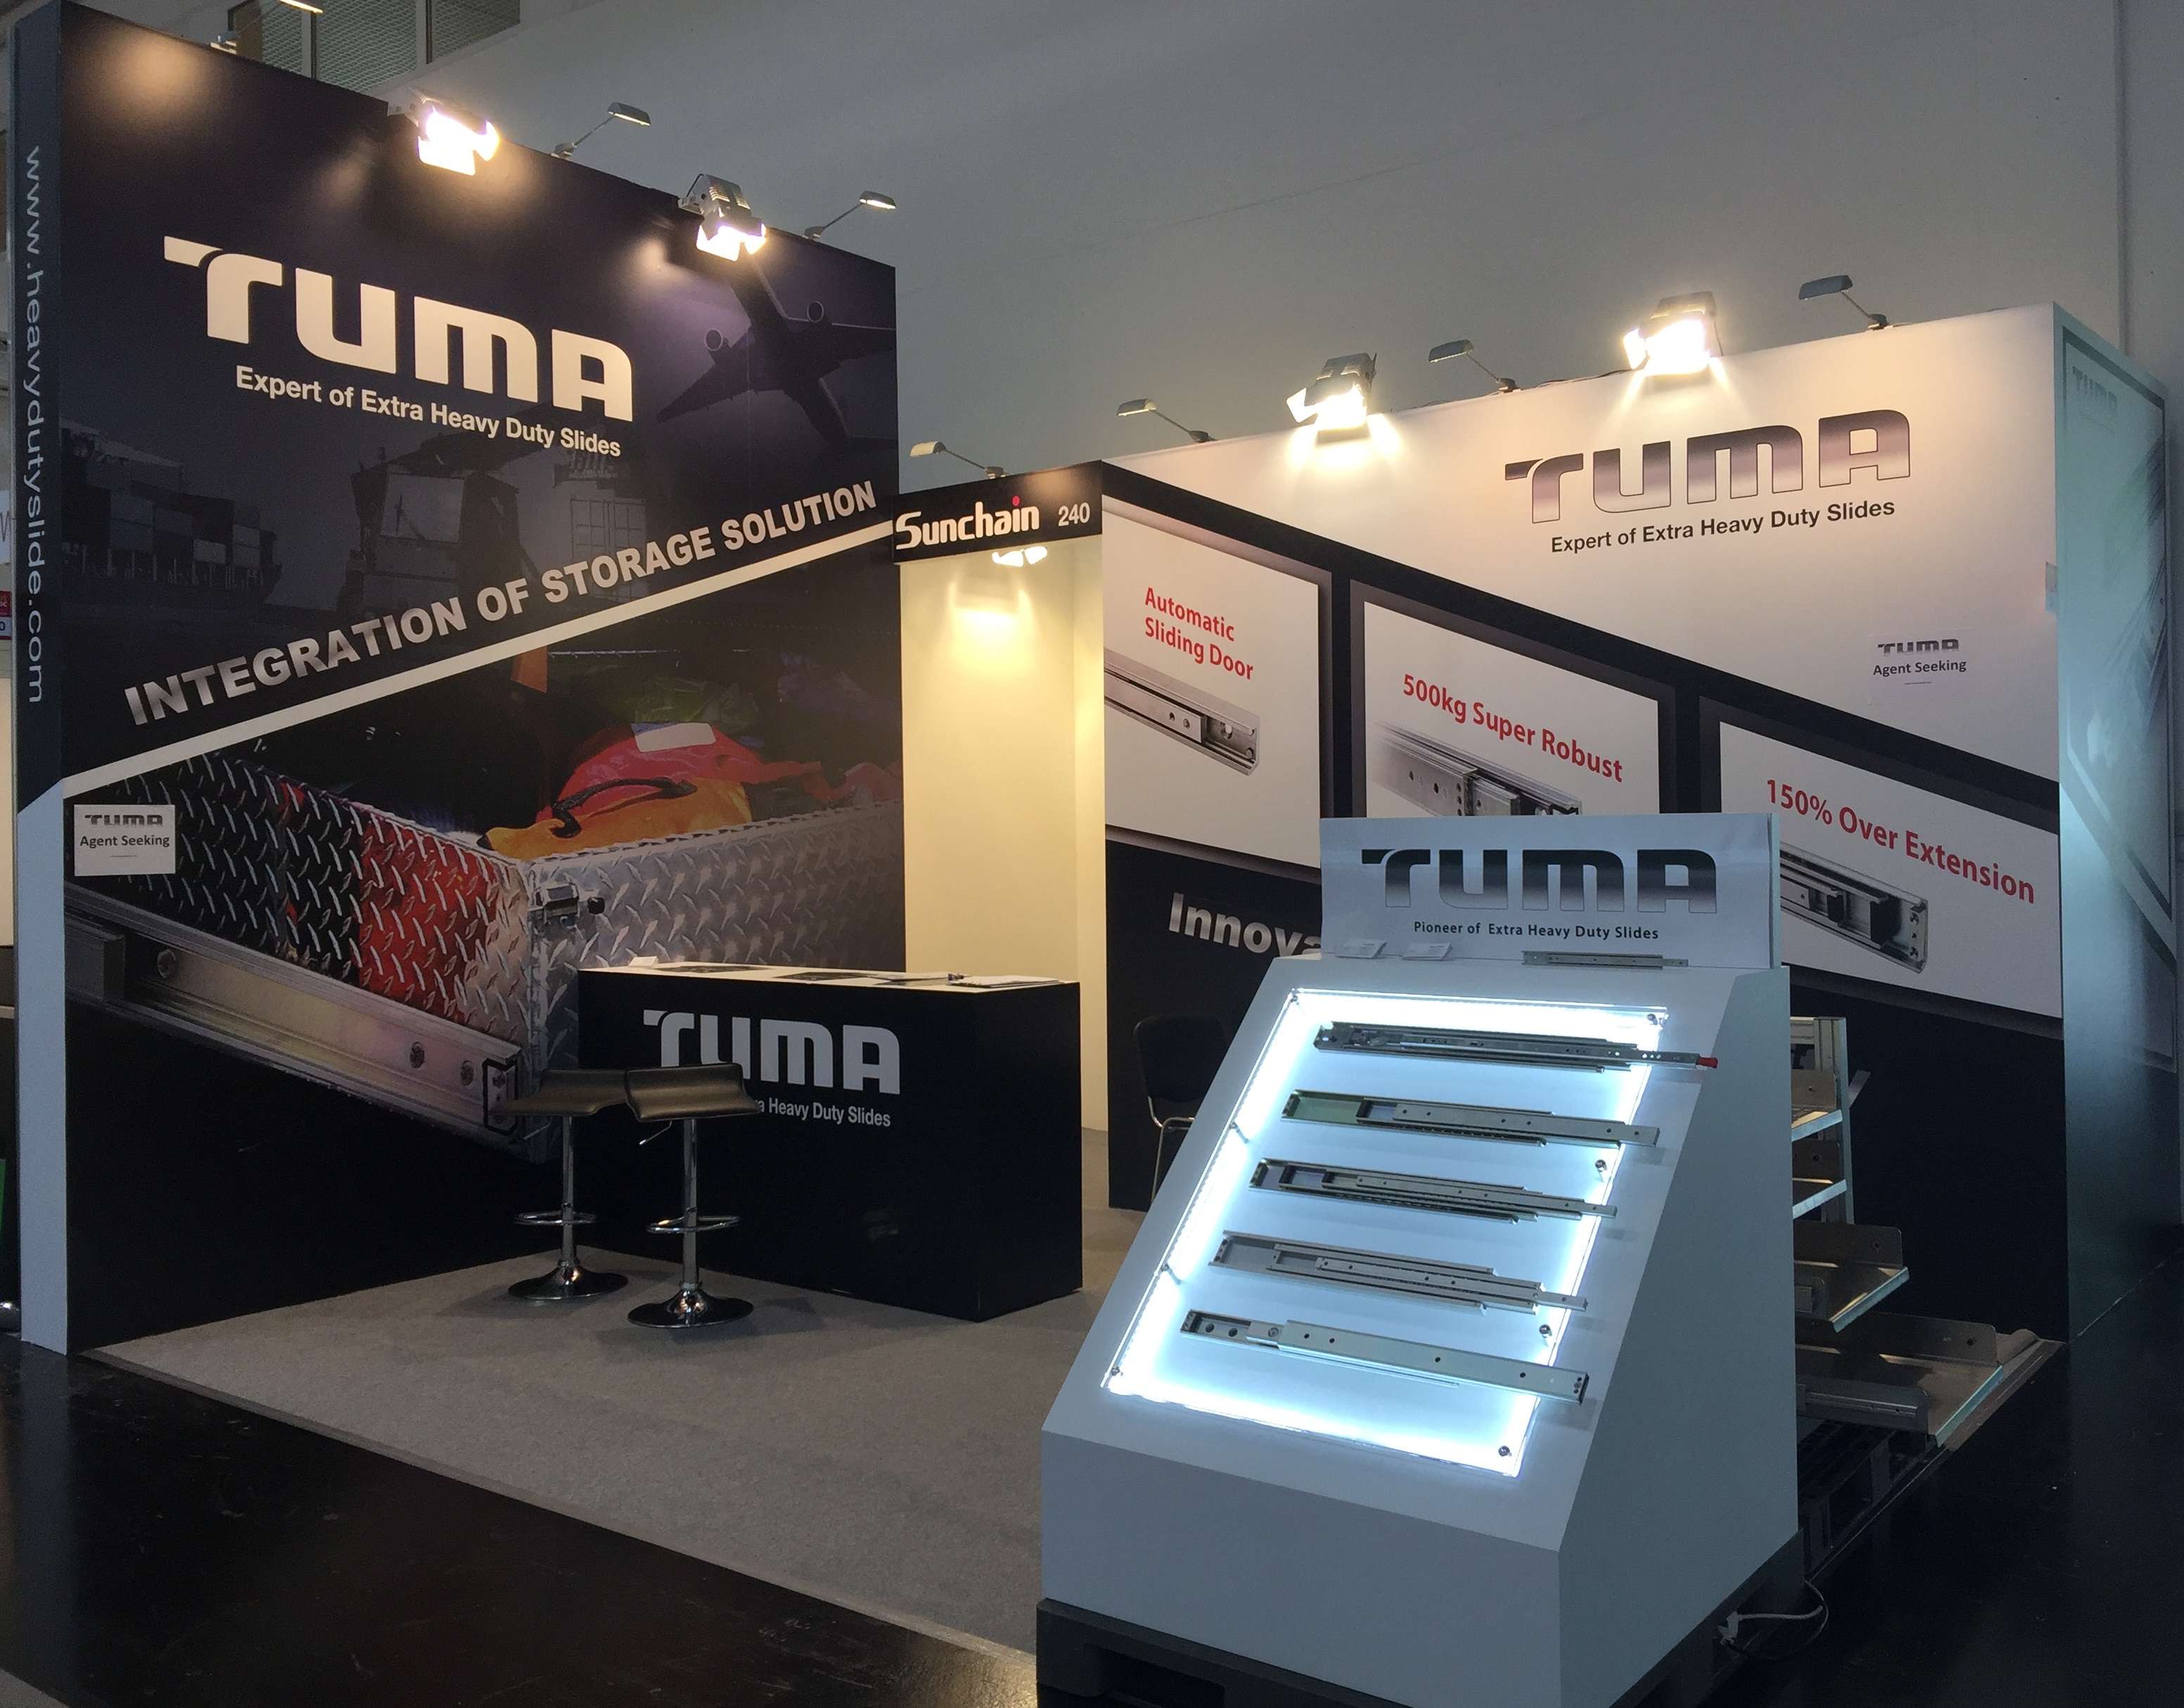 Outstanding Connection With Transport Logistic 2017 Trend By TUMA aircraft interior parts,aircraft seat parts,aircraft seat parts suppliers,aircraft passenger seat parts tracking seats guides, lightweight rails,ROLLON ASN22 ROLLON ASN35 ROLLON ASN63 ROLLON ASN43 rollon telescopic slides rollon telescopic slider rollon telescopic rails rollon telescopic rail price,hegra slides,hegra telescopic slides,extra heavy duty drawer slides,heavy duty rail slides,heavy duty slide,heavy duty full extension ball bearing drawer slides,heavy duty cabinet drawer slides,heavy duty cabinet slides,industrial drawer slides,heavy duty glides,heavy duty industrial drawer slides,heavy duty ball bearing slides,ball bearing slides heavy duty,full extension heavy duty drawer slides,heavy duty drawer slides,draw slides heavy duty,heavy duty slide rails,heavy duty drawer slide,tool box drawer slides,heavy duty full extension drawer slides,heavy duty undermount drawer slides,drawer slides heavy duty,heavy duty pantry slides,drawer slides heavy duty industrial,heavy duty sliding rails,drawer slides heavy duty industrial,industrial drawer slides,heavy duty industrial drawer slides,industrial slide rails,industrial telescopic slides,heavy duty industrial slides,atm spare parts,atm parts,